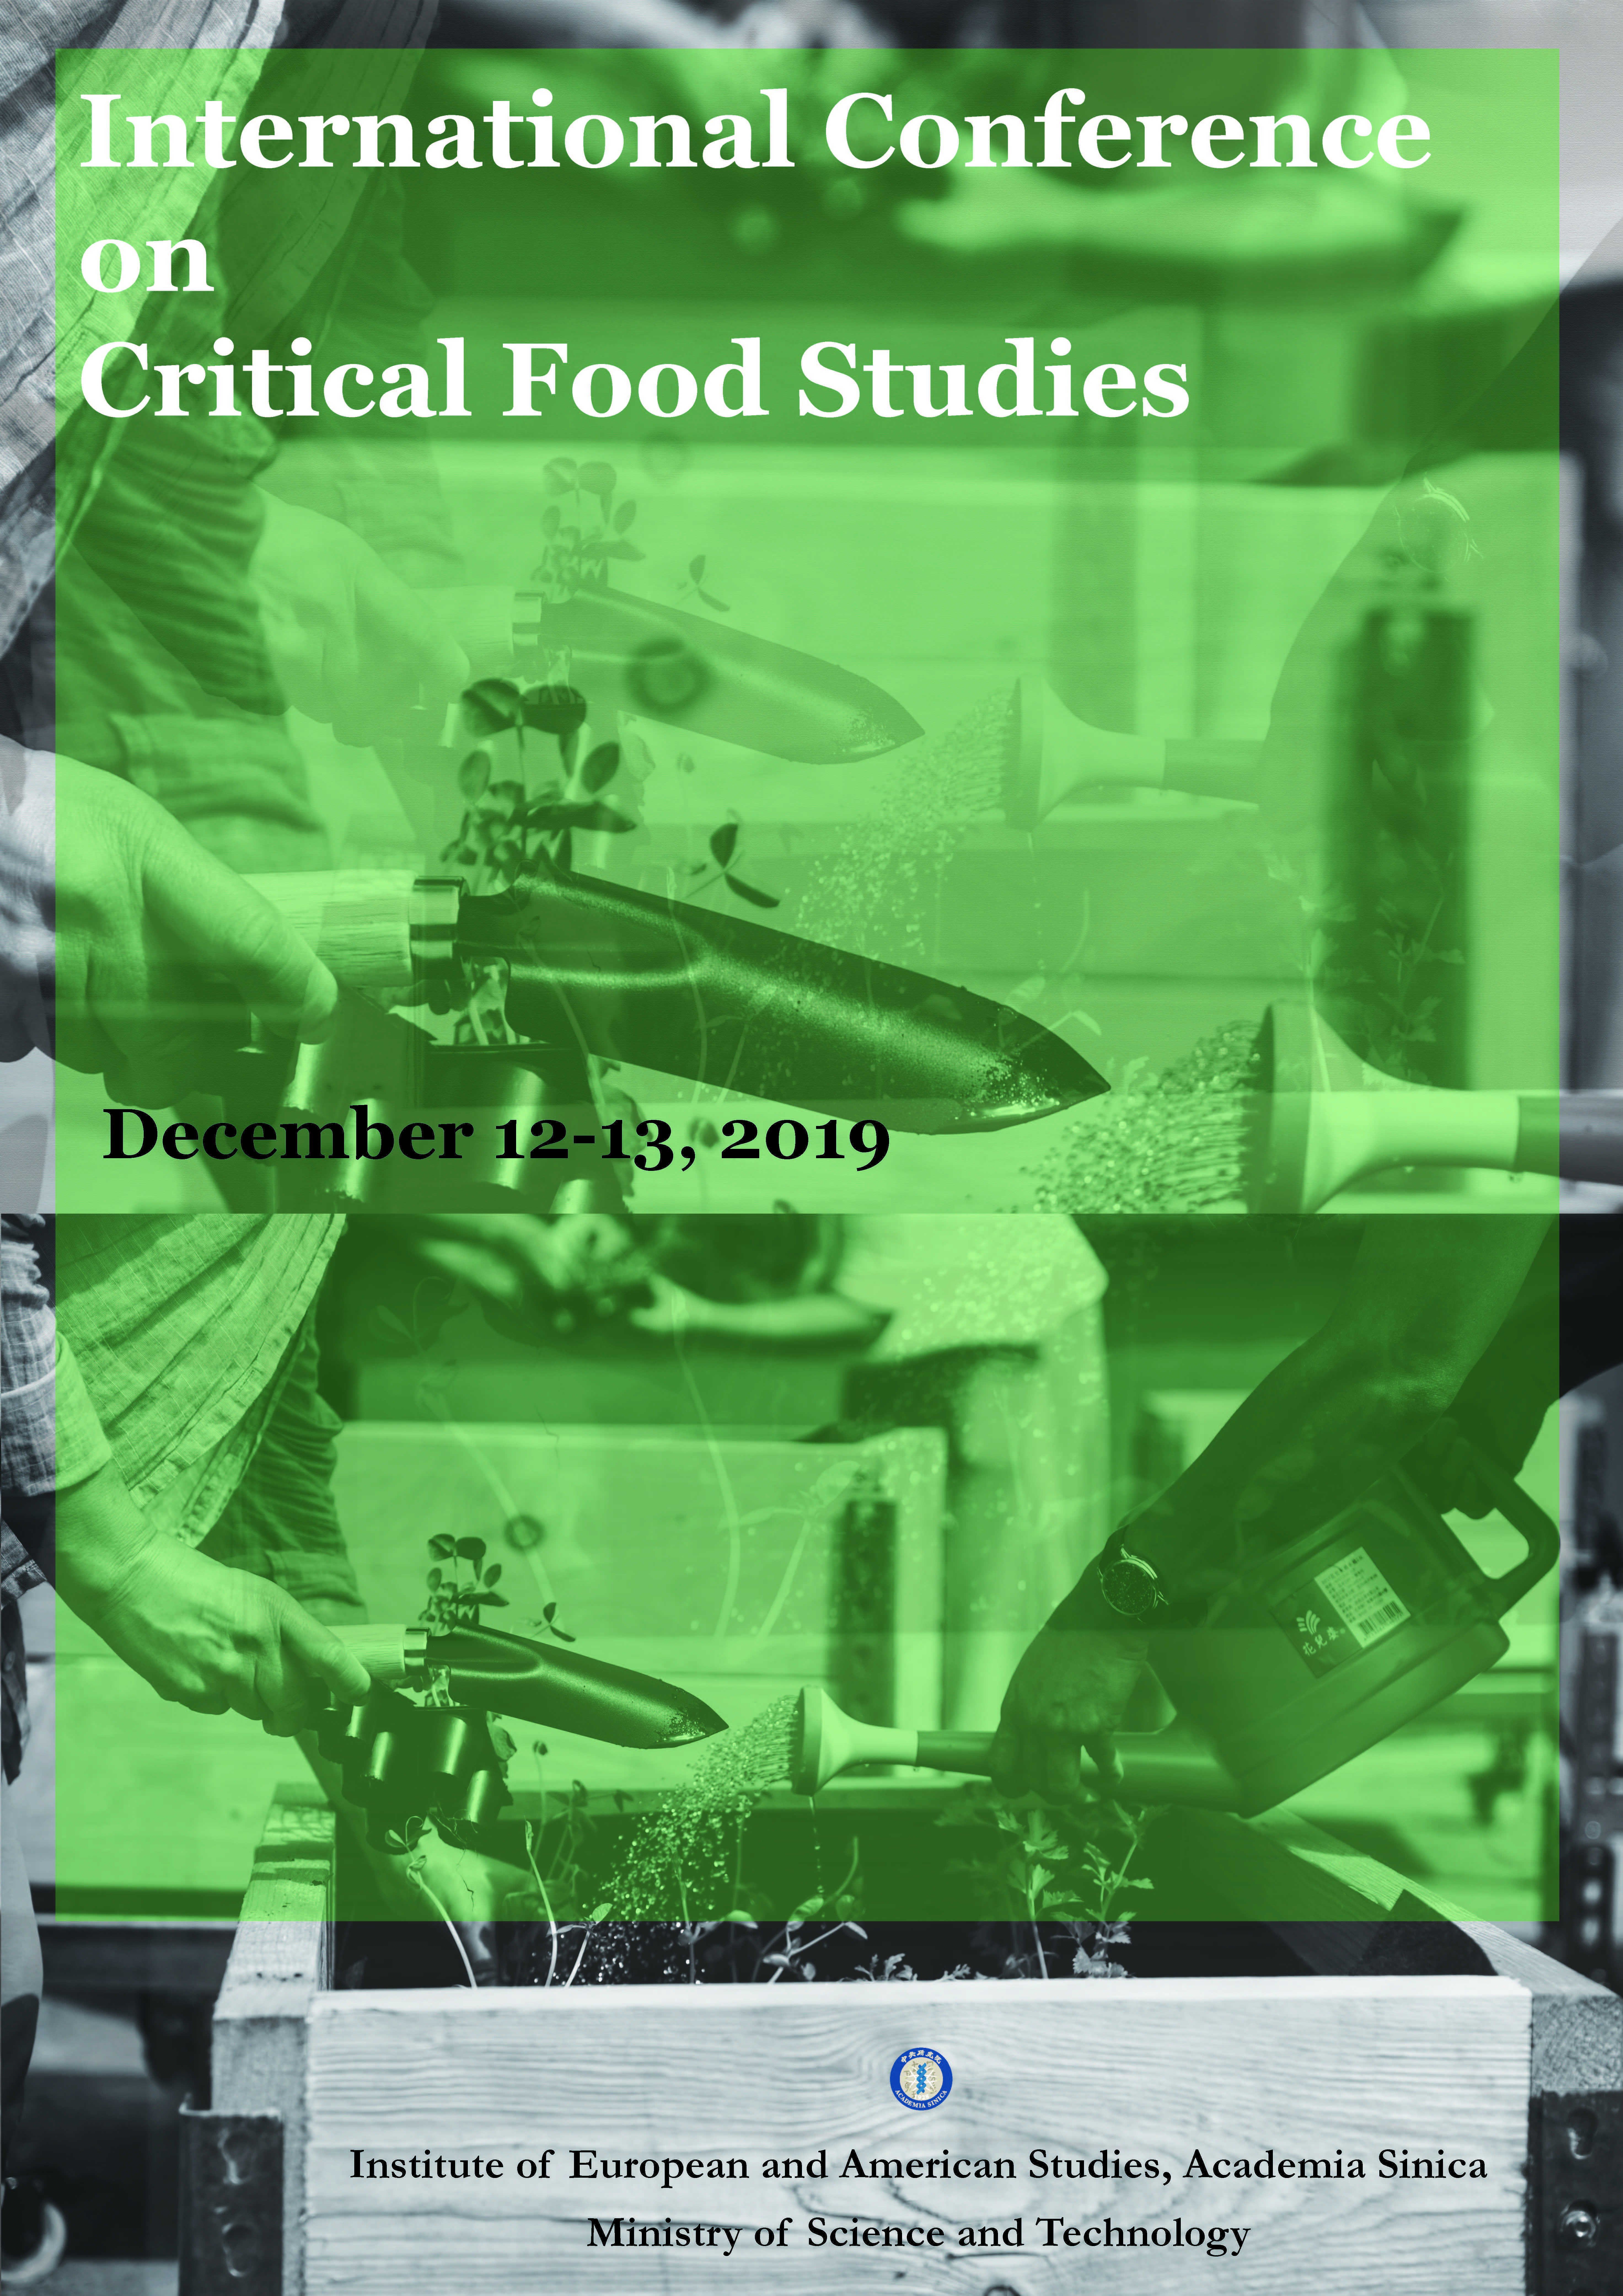 International Conference on Critical Food Studies